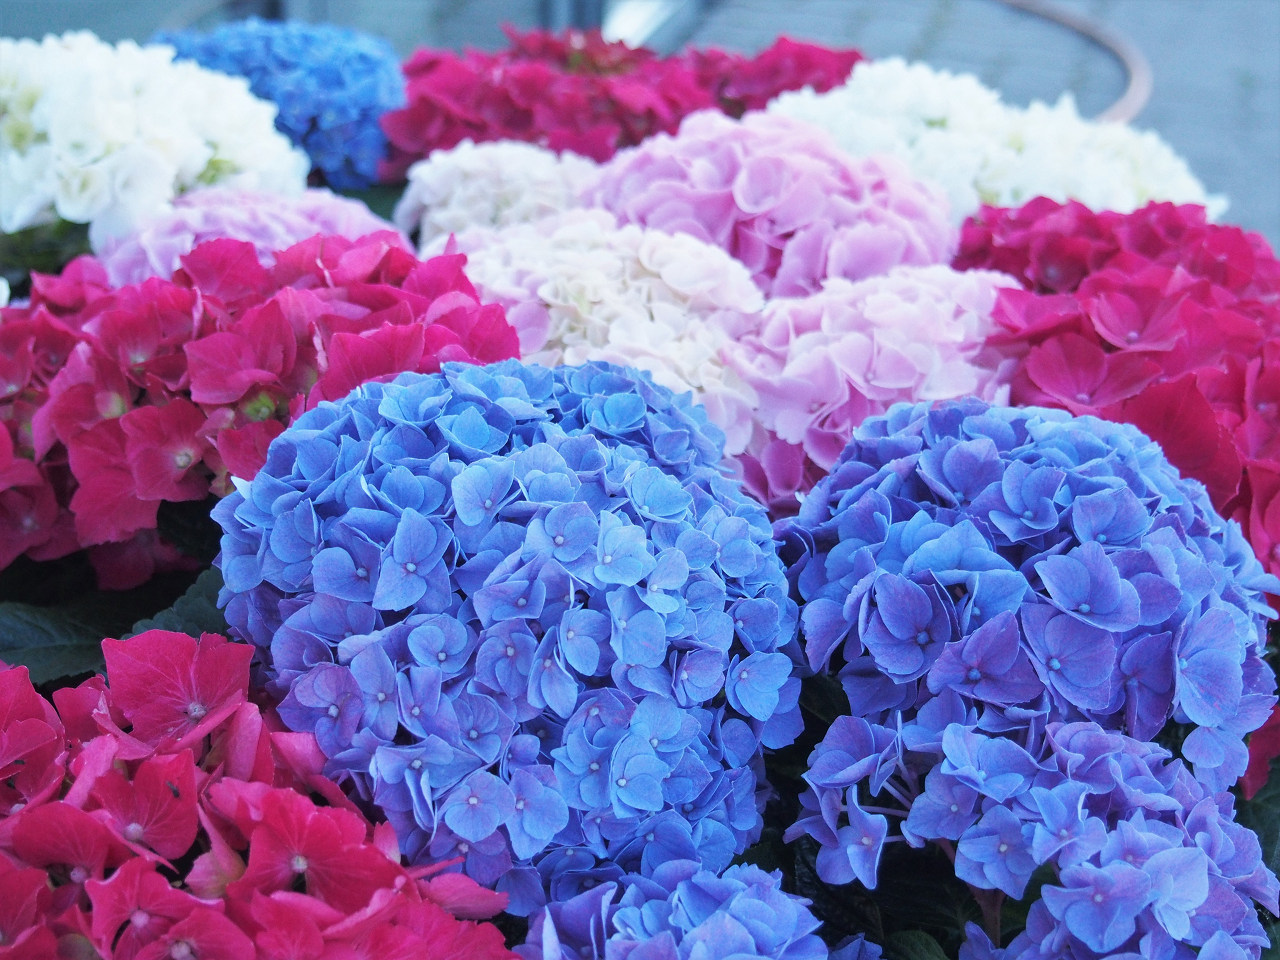 Image of red, pink, and blue hydrangeas.